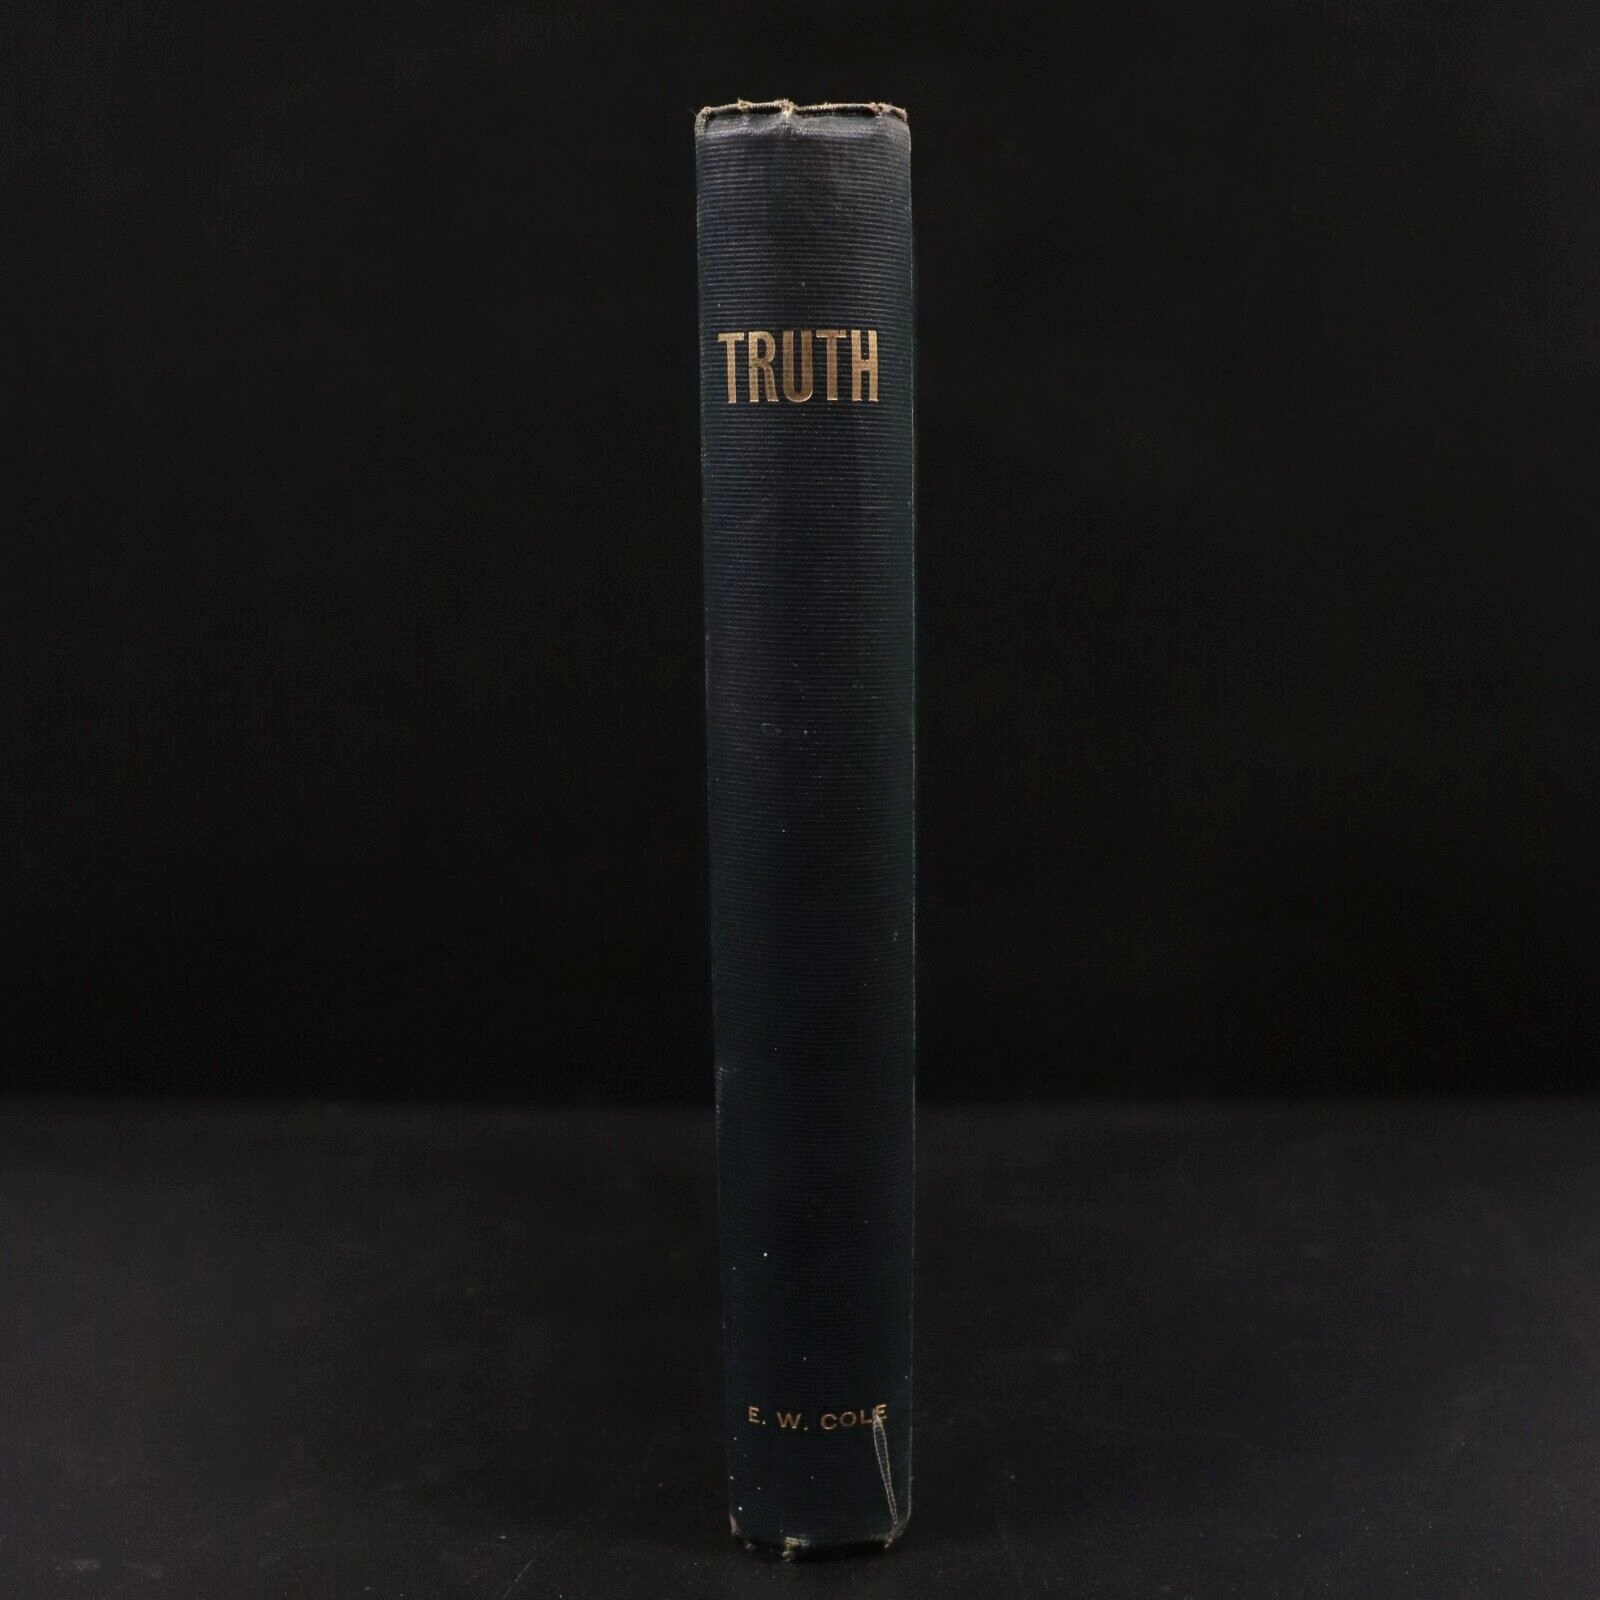 c1910 Truth: Cream Of Human Thought by E.W. Cole Antique Theology Book 2nd